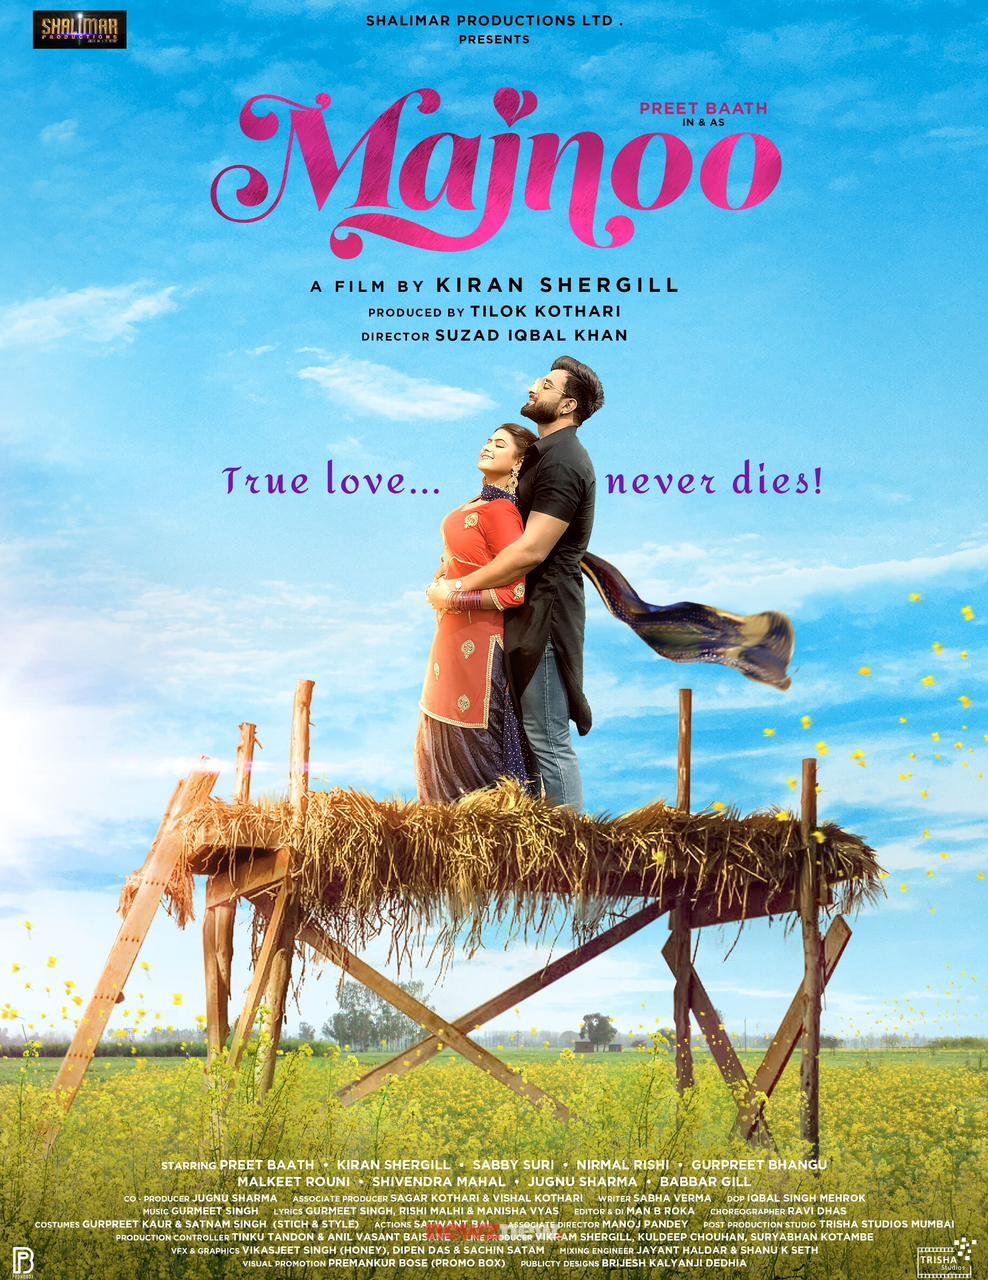 Shalimar Production Limited Unveils the Romantic Saga 'Majnoo' with a Heartwarming First Look Reveal